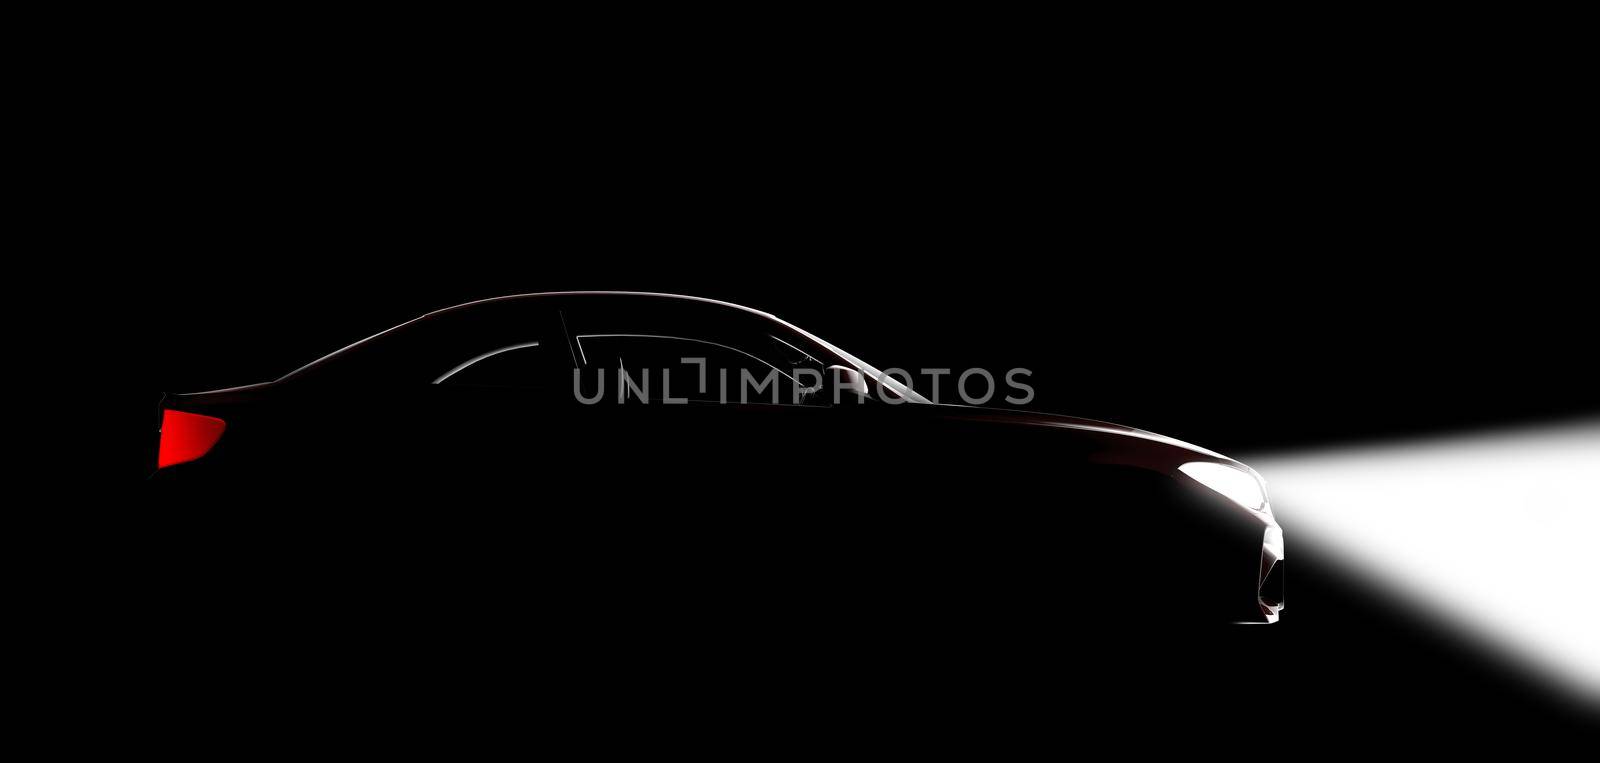 A car in a black studio with lights by cla78